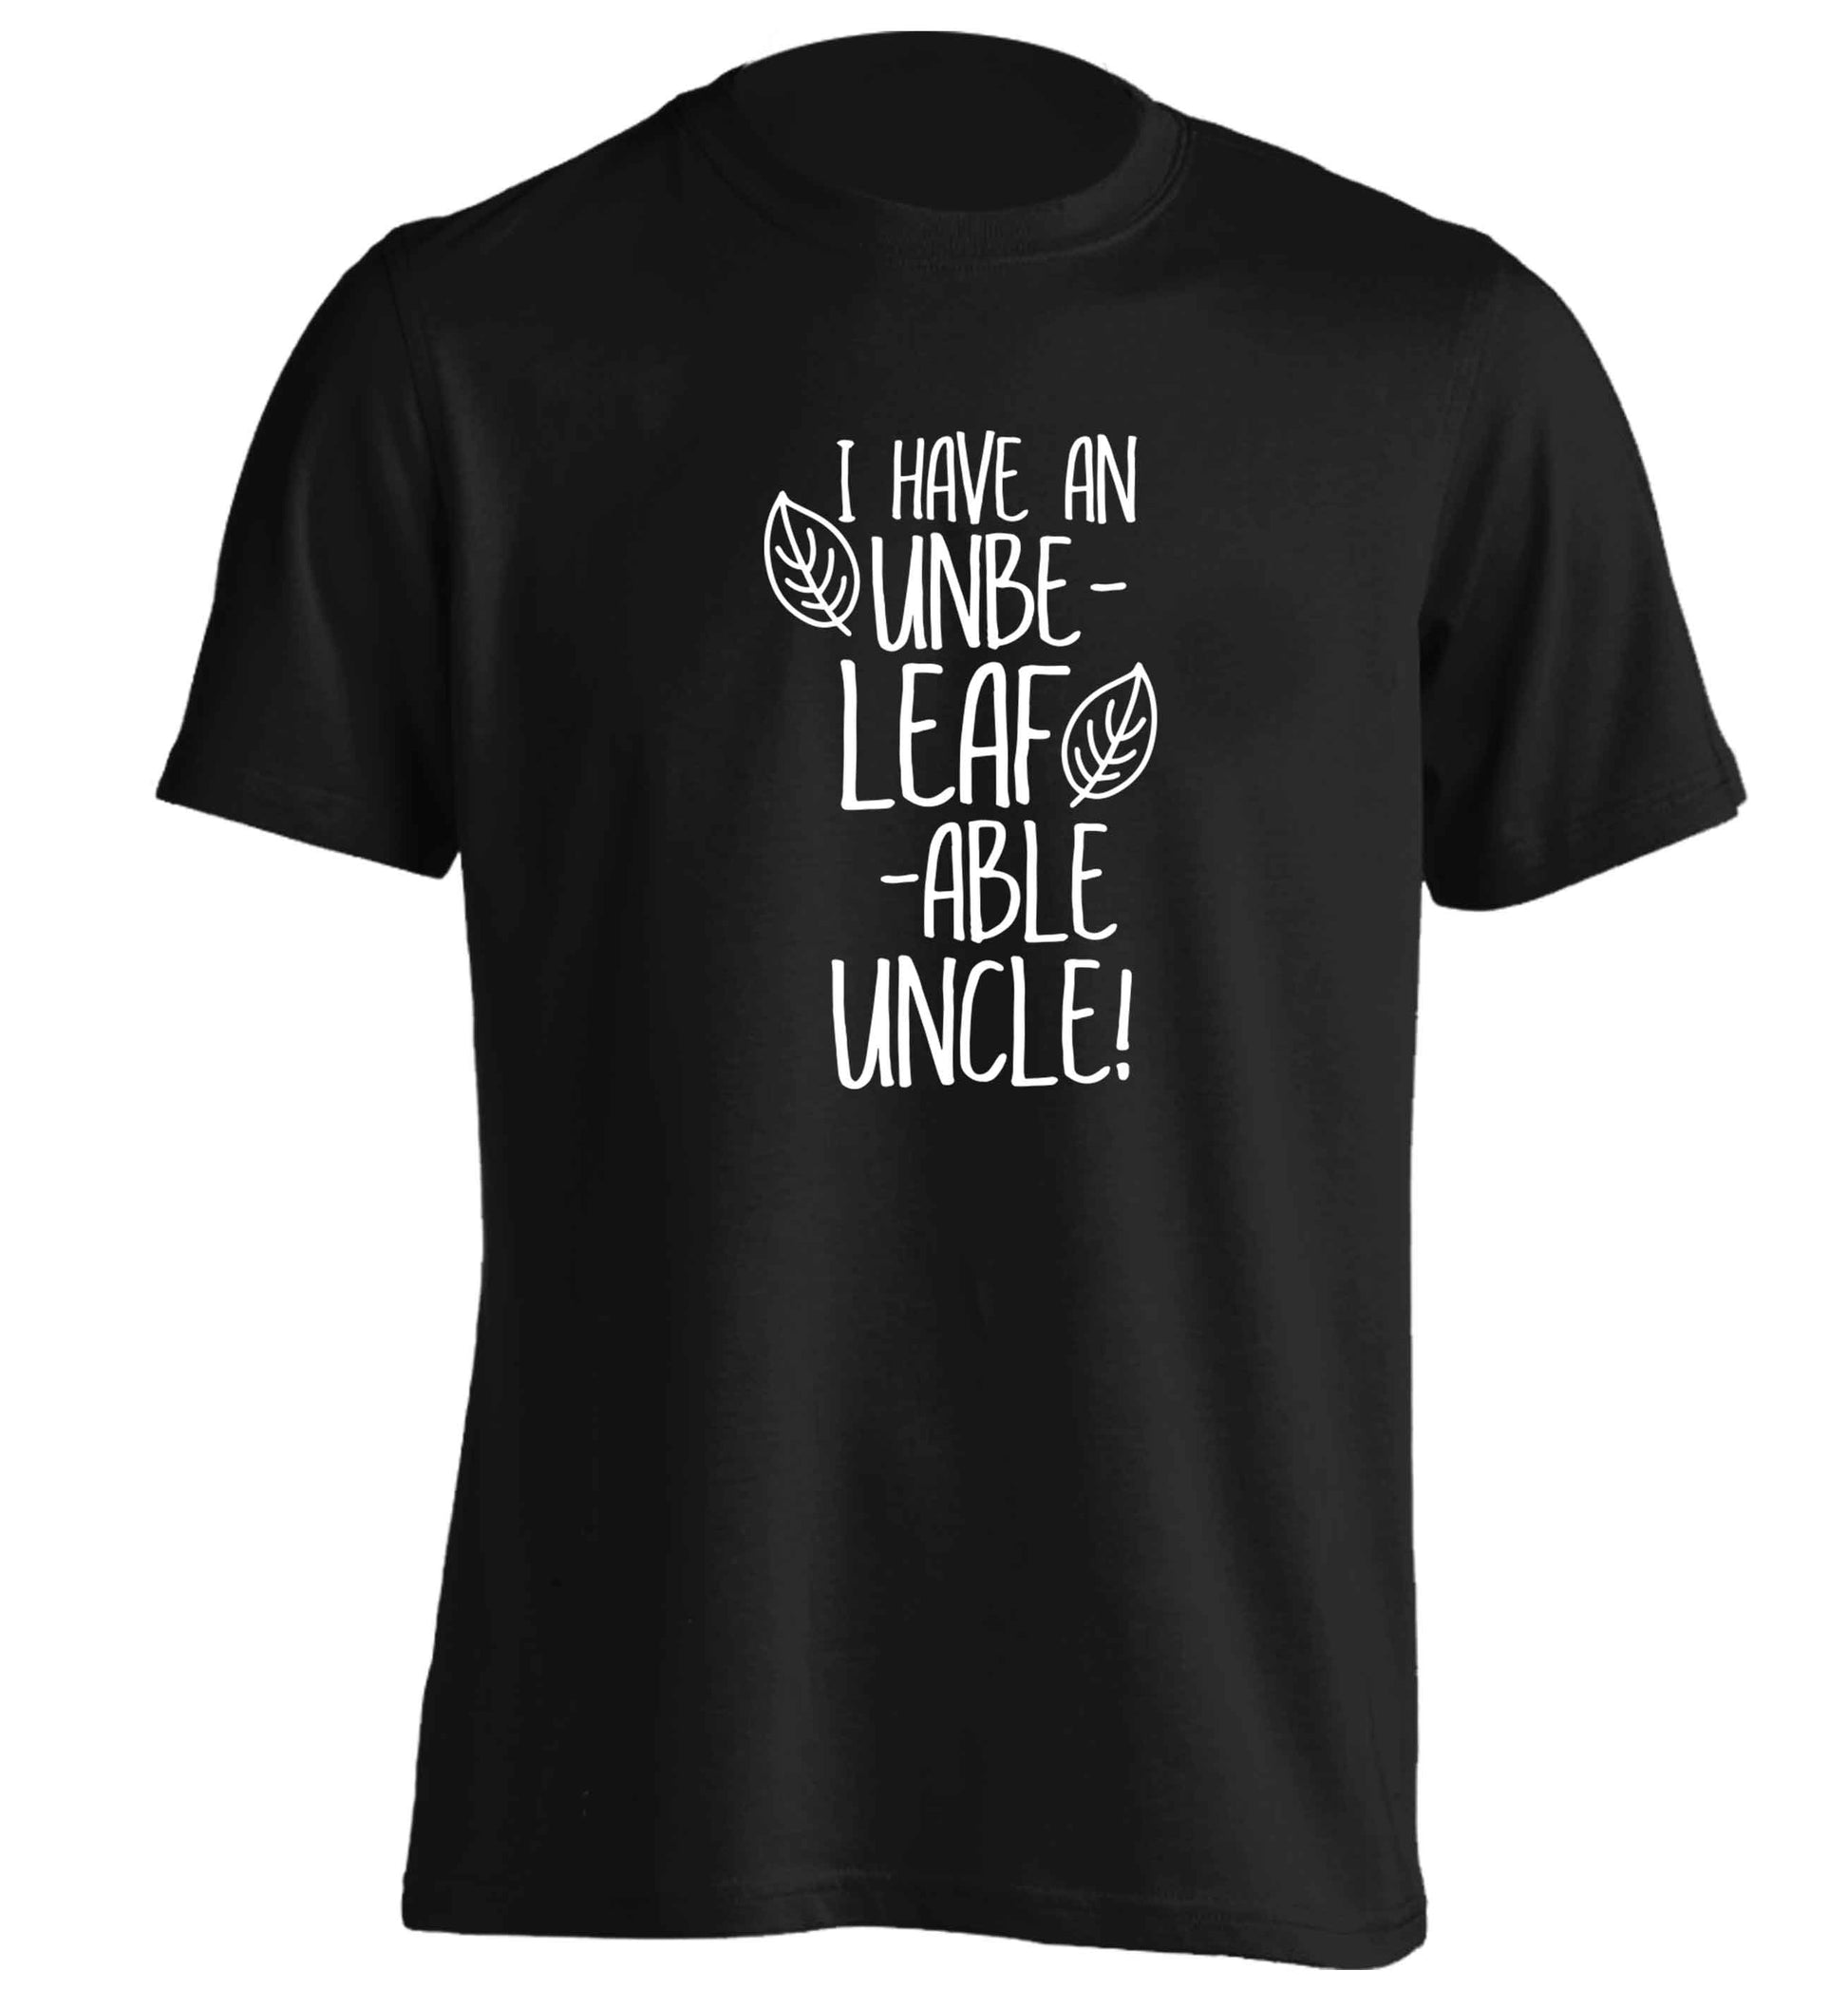 I have an unbe-leaf-able uncle adults unisex black Tshirt 2XL